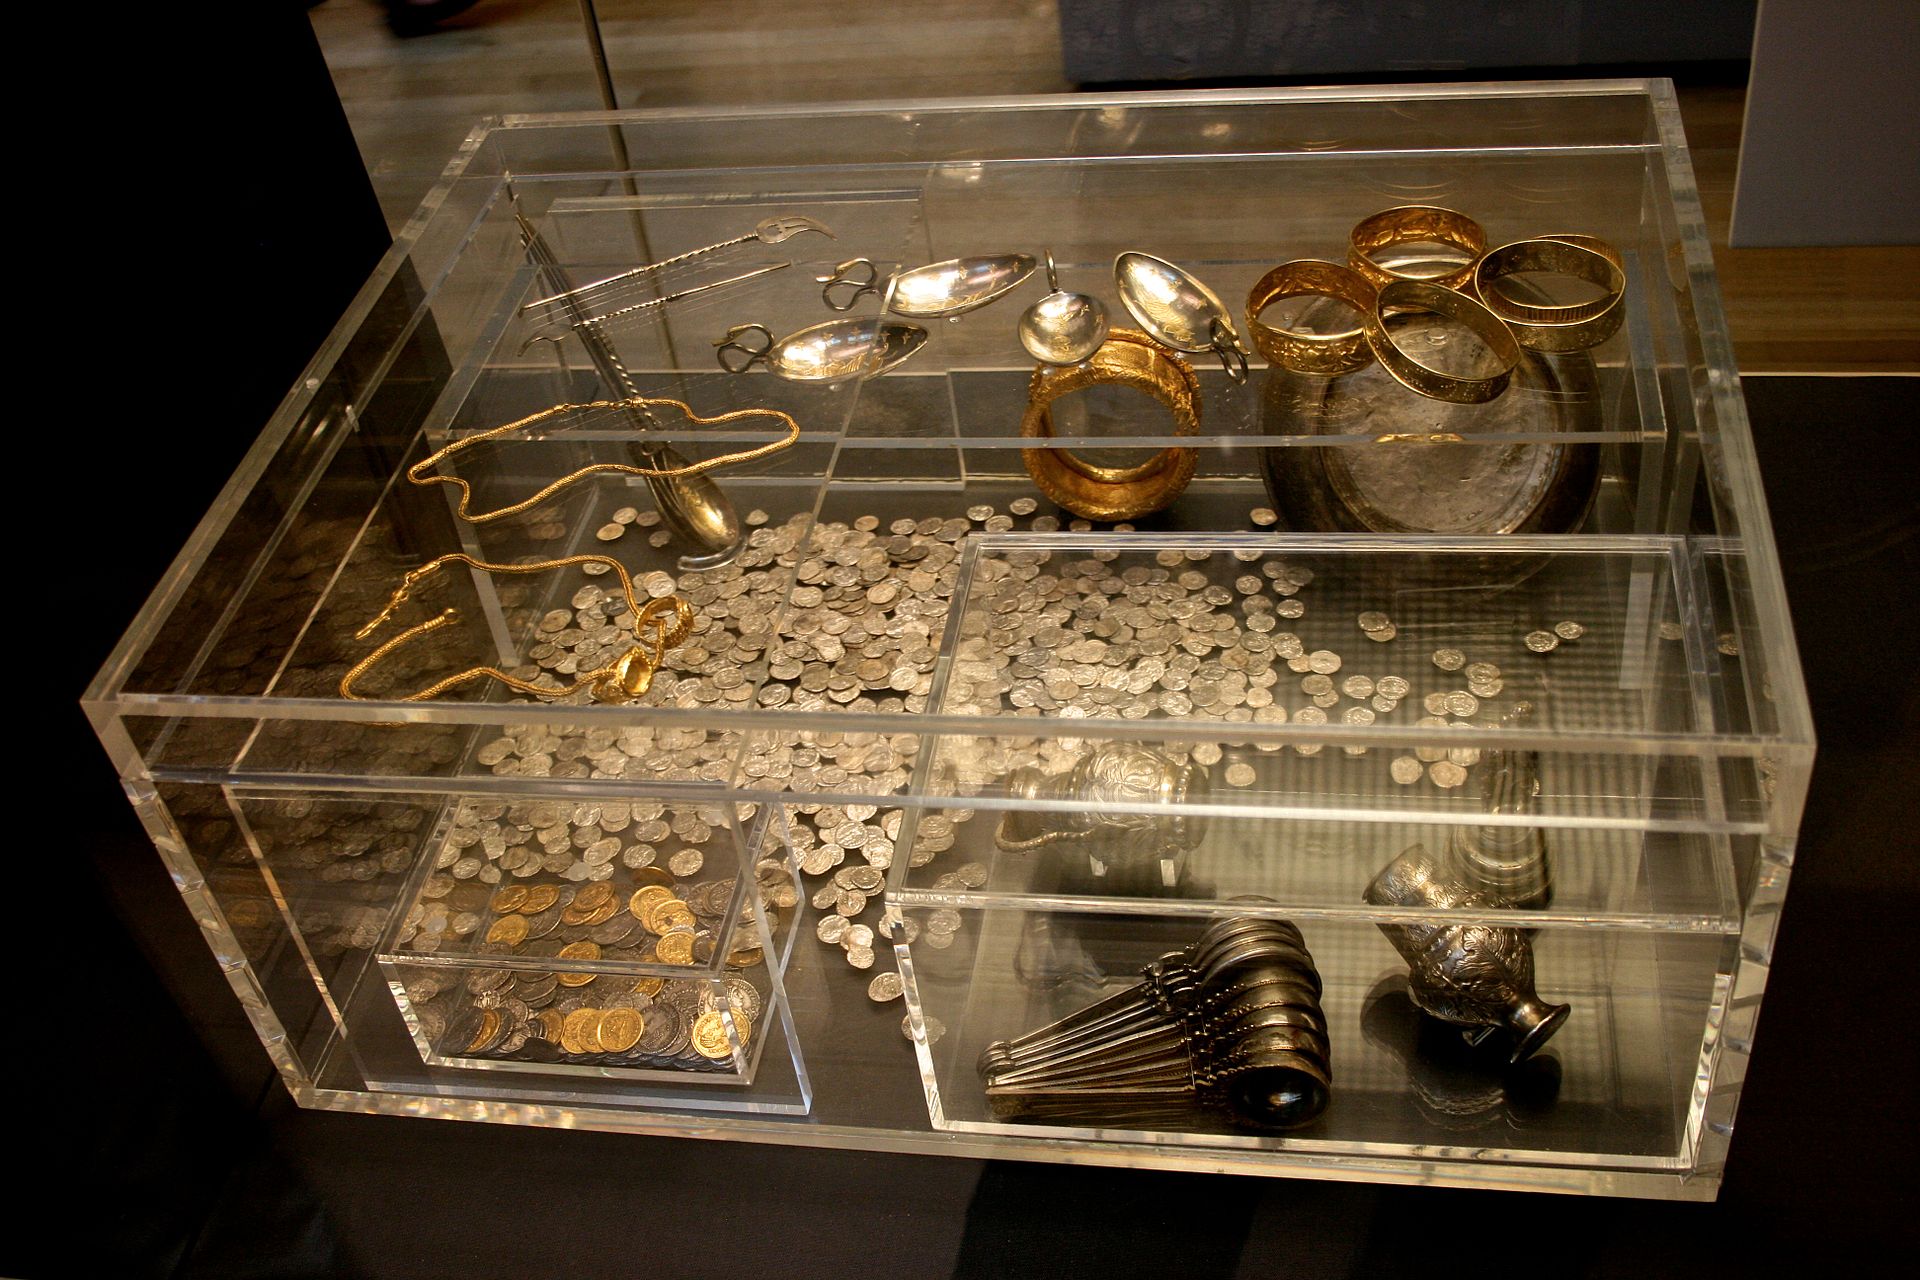 Hoxne Hoard: Display case at the British Museum showing a reconstruction of the arrangement of the hoard treasure when excavated in 1992. Photograph by Mike Peel (www.mikepeel.net).